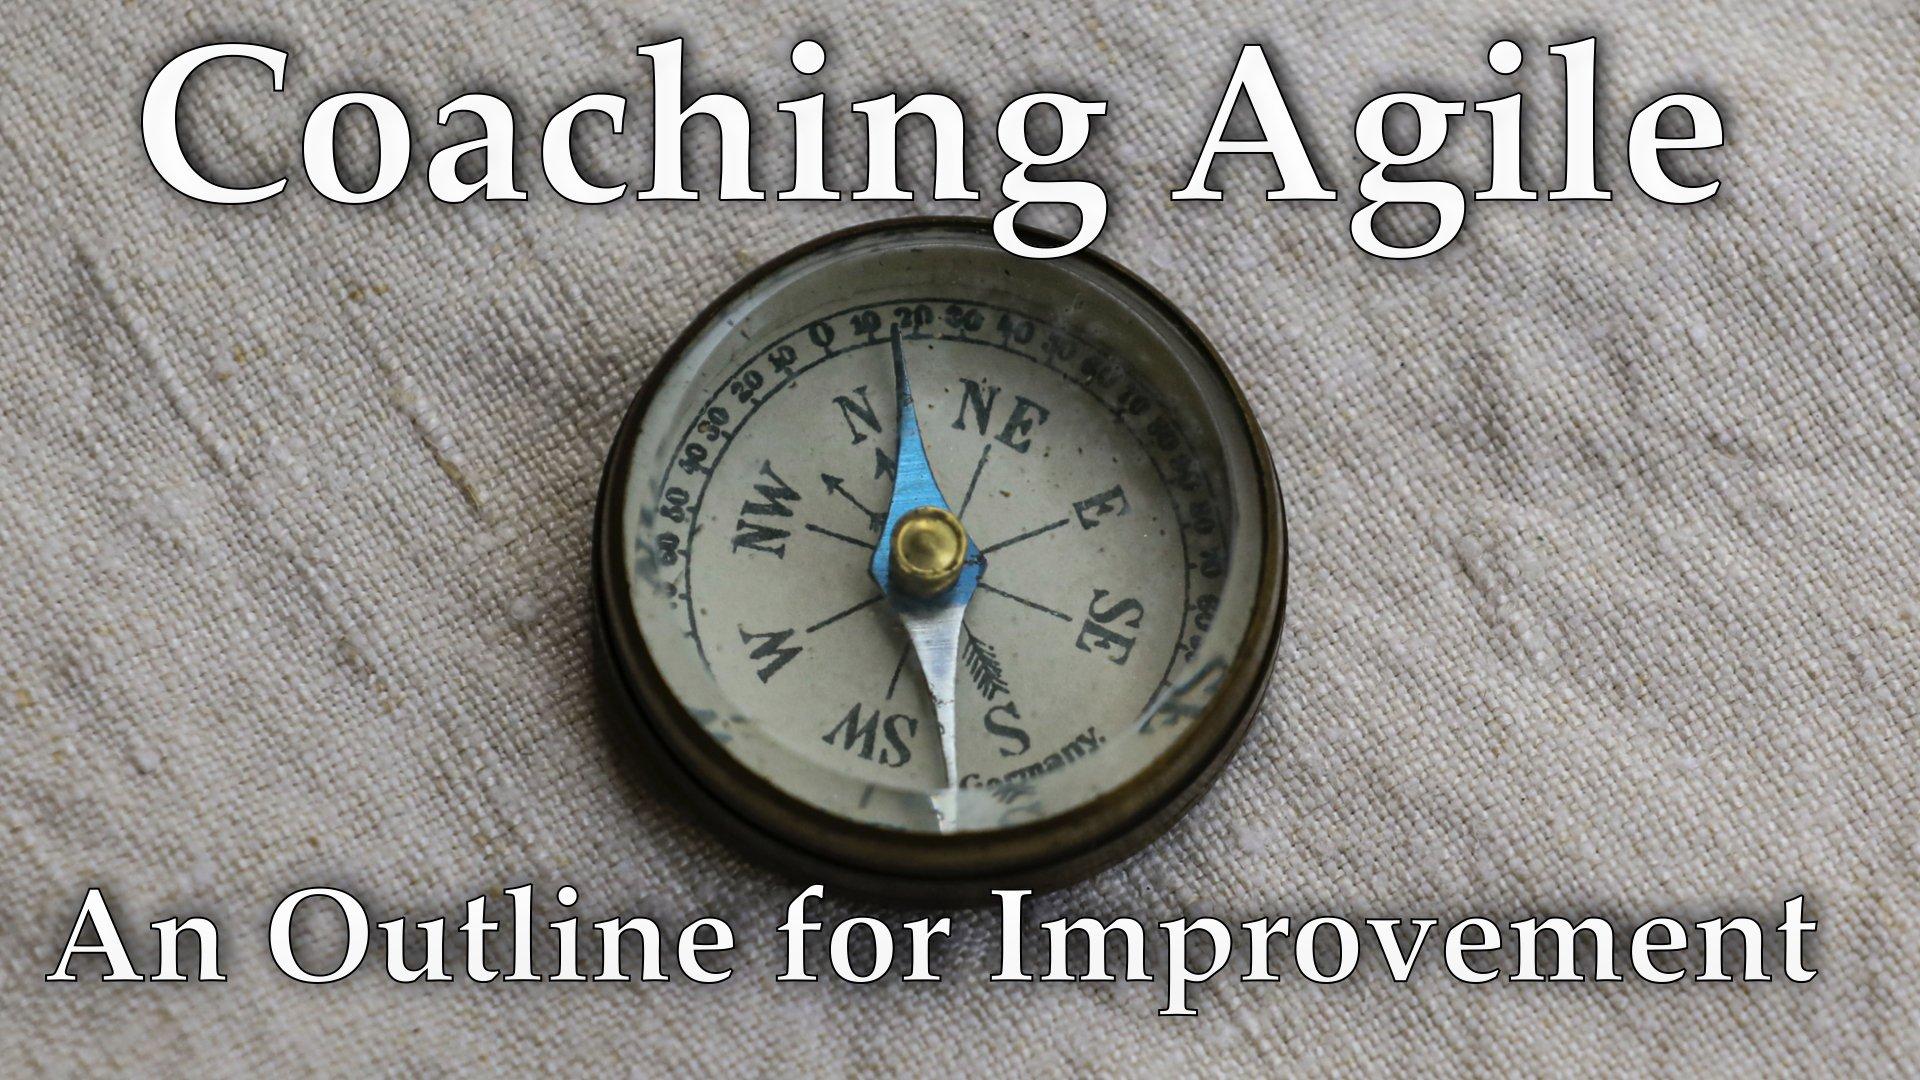 Coaching Agile - An Outline for Improvement